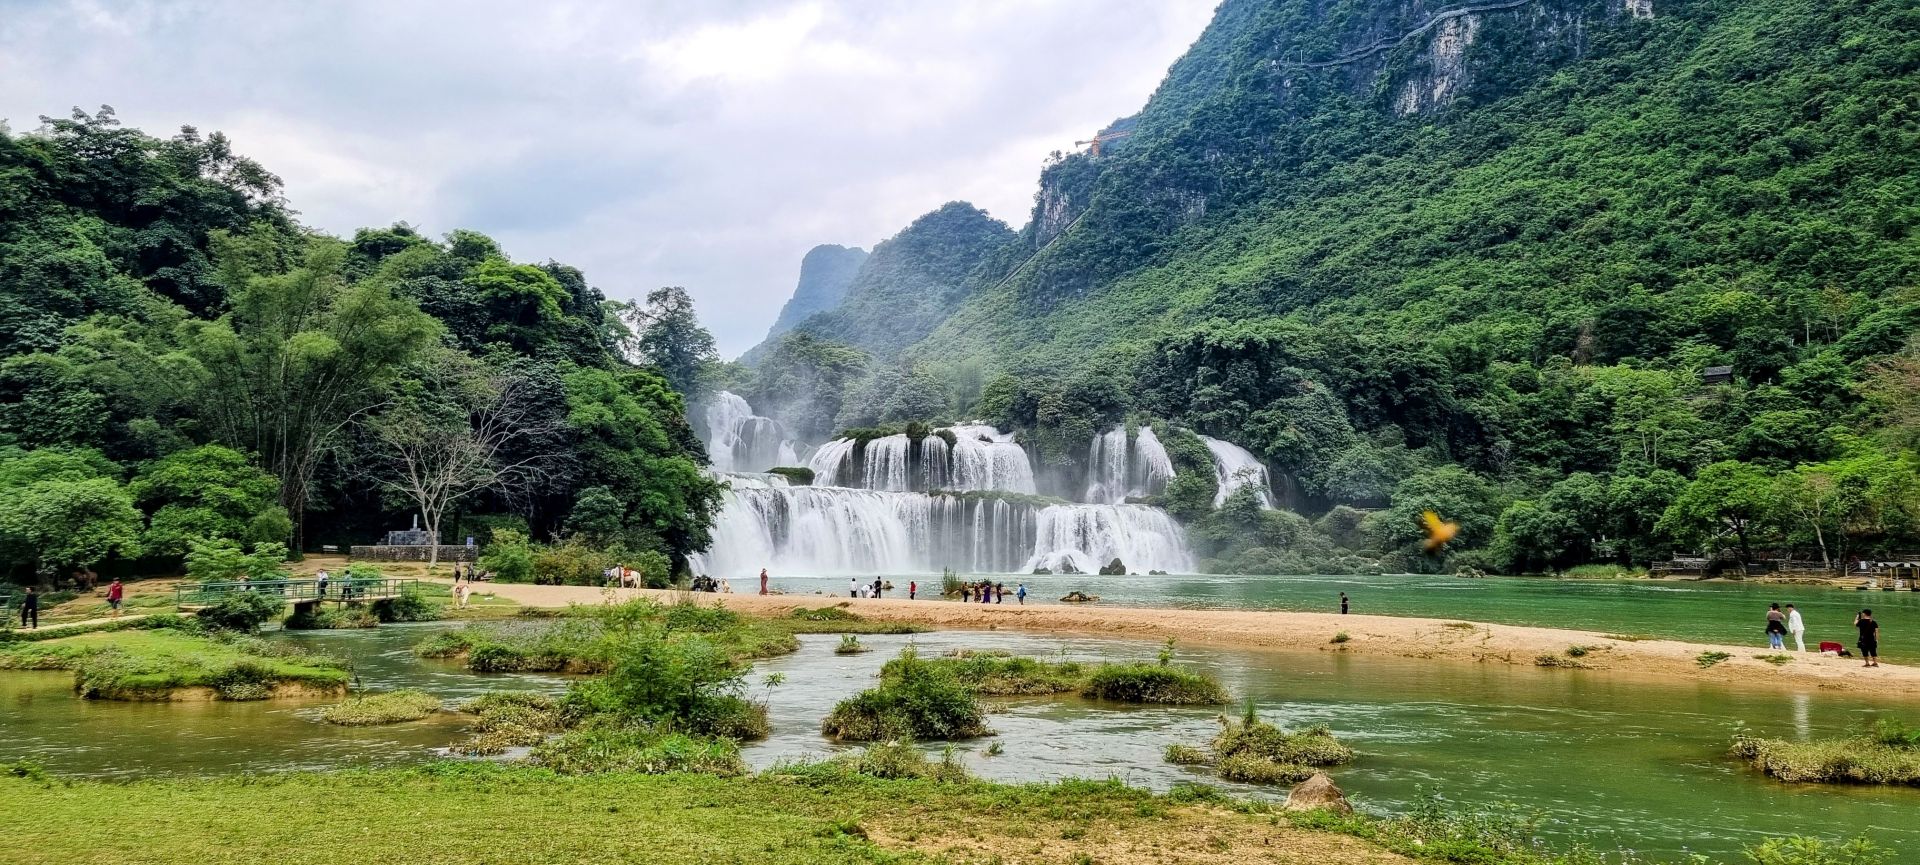 a wide view of ban gioc waterfall with a bird flying past